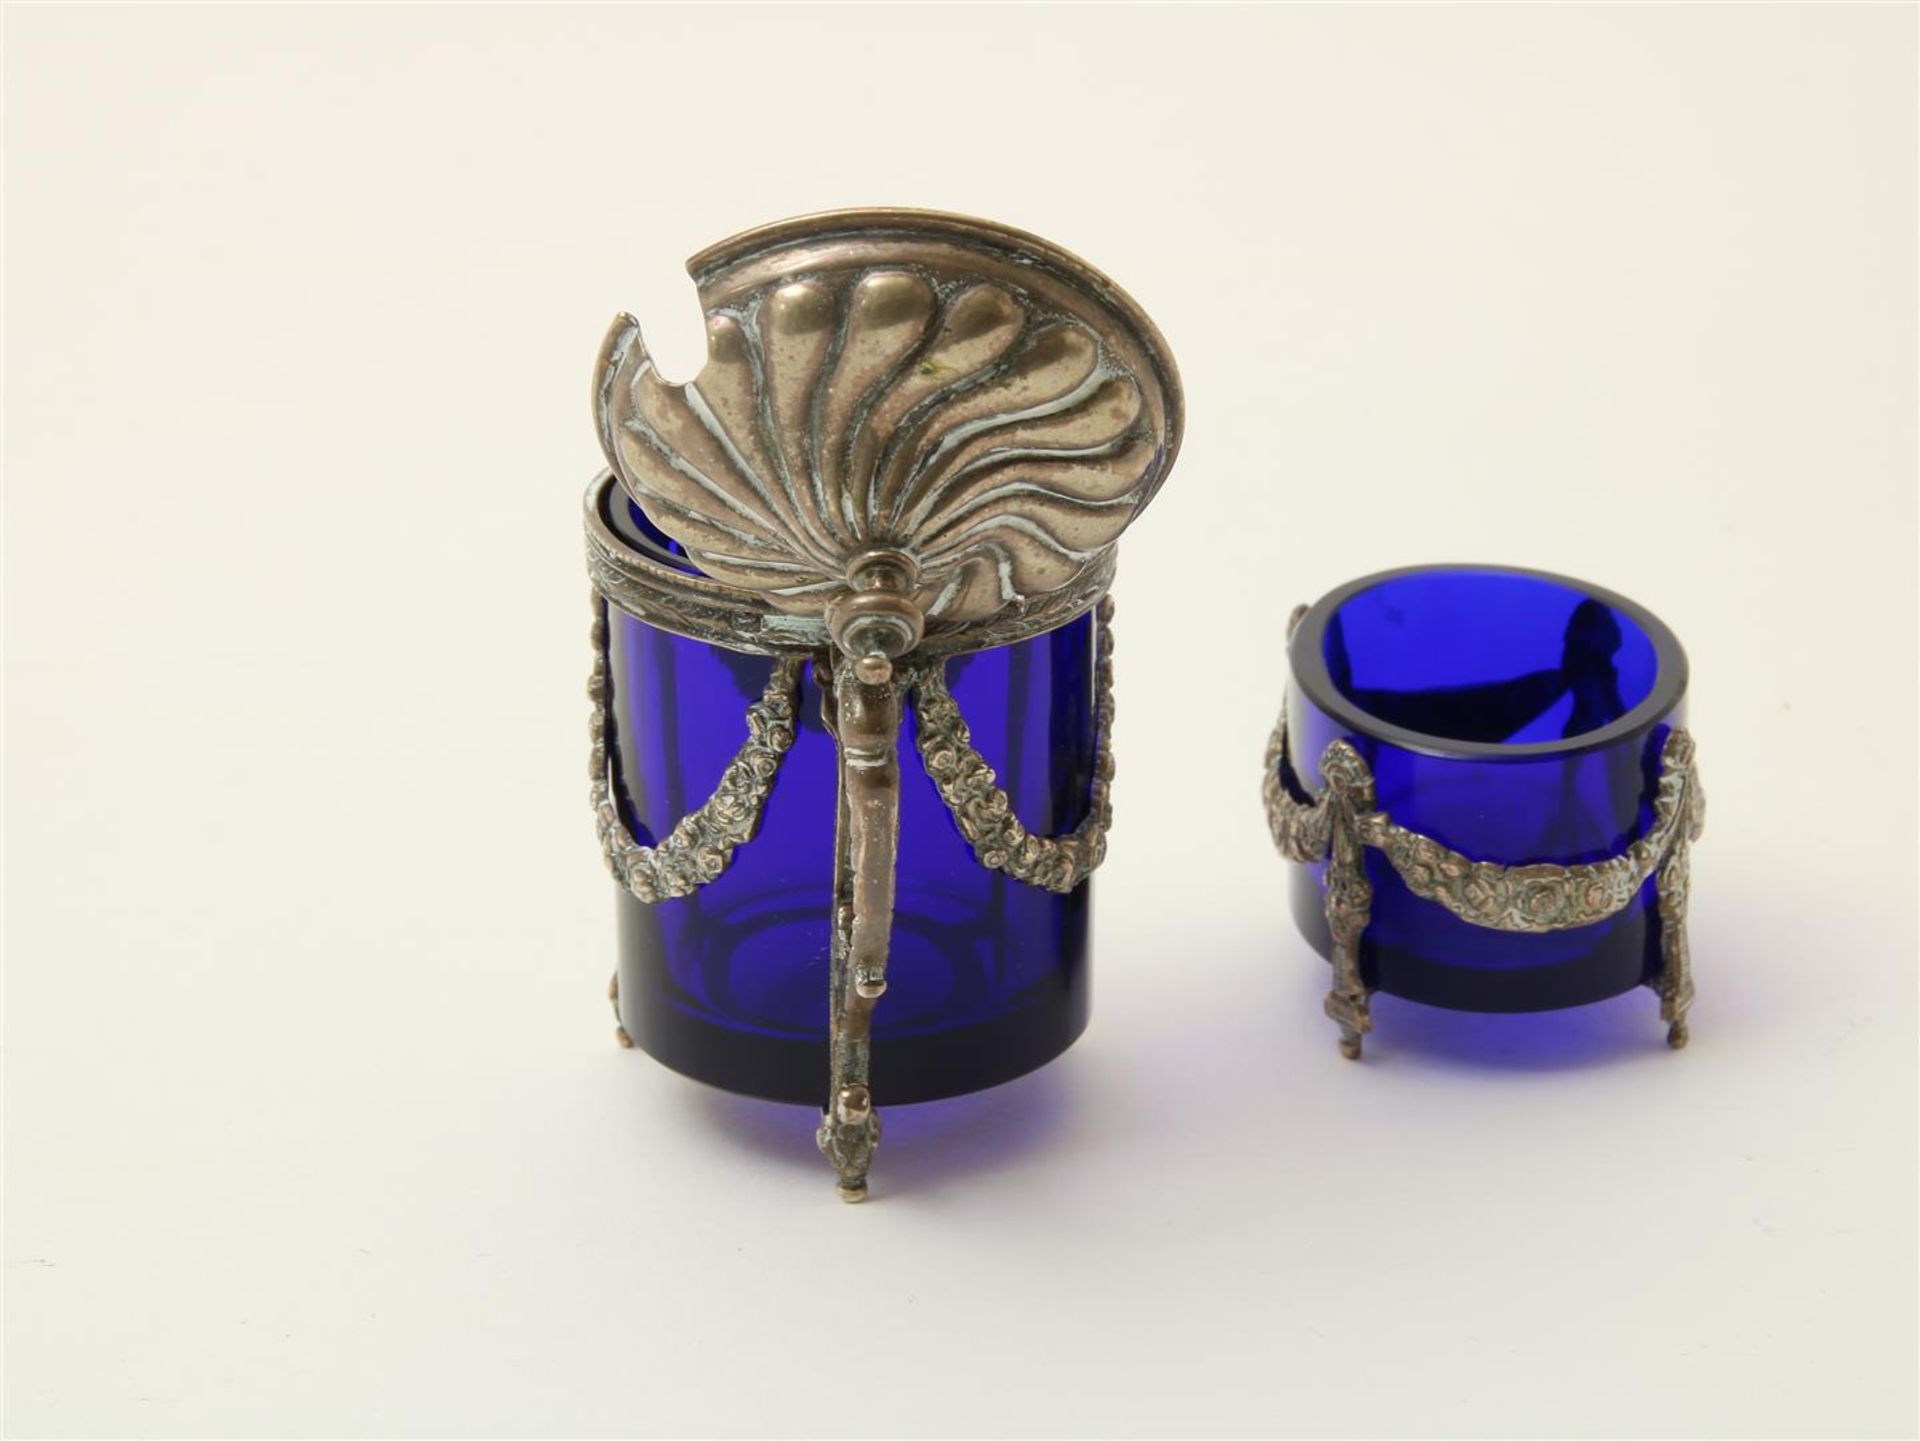 Silver mustard pot and salt shaker with blue glass inner container, Dutch hallmarked. - Image 3 of 3